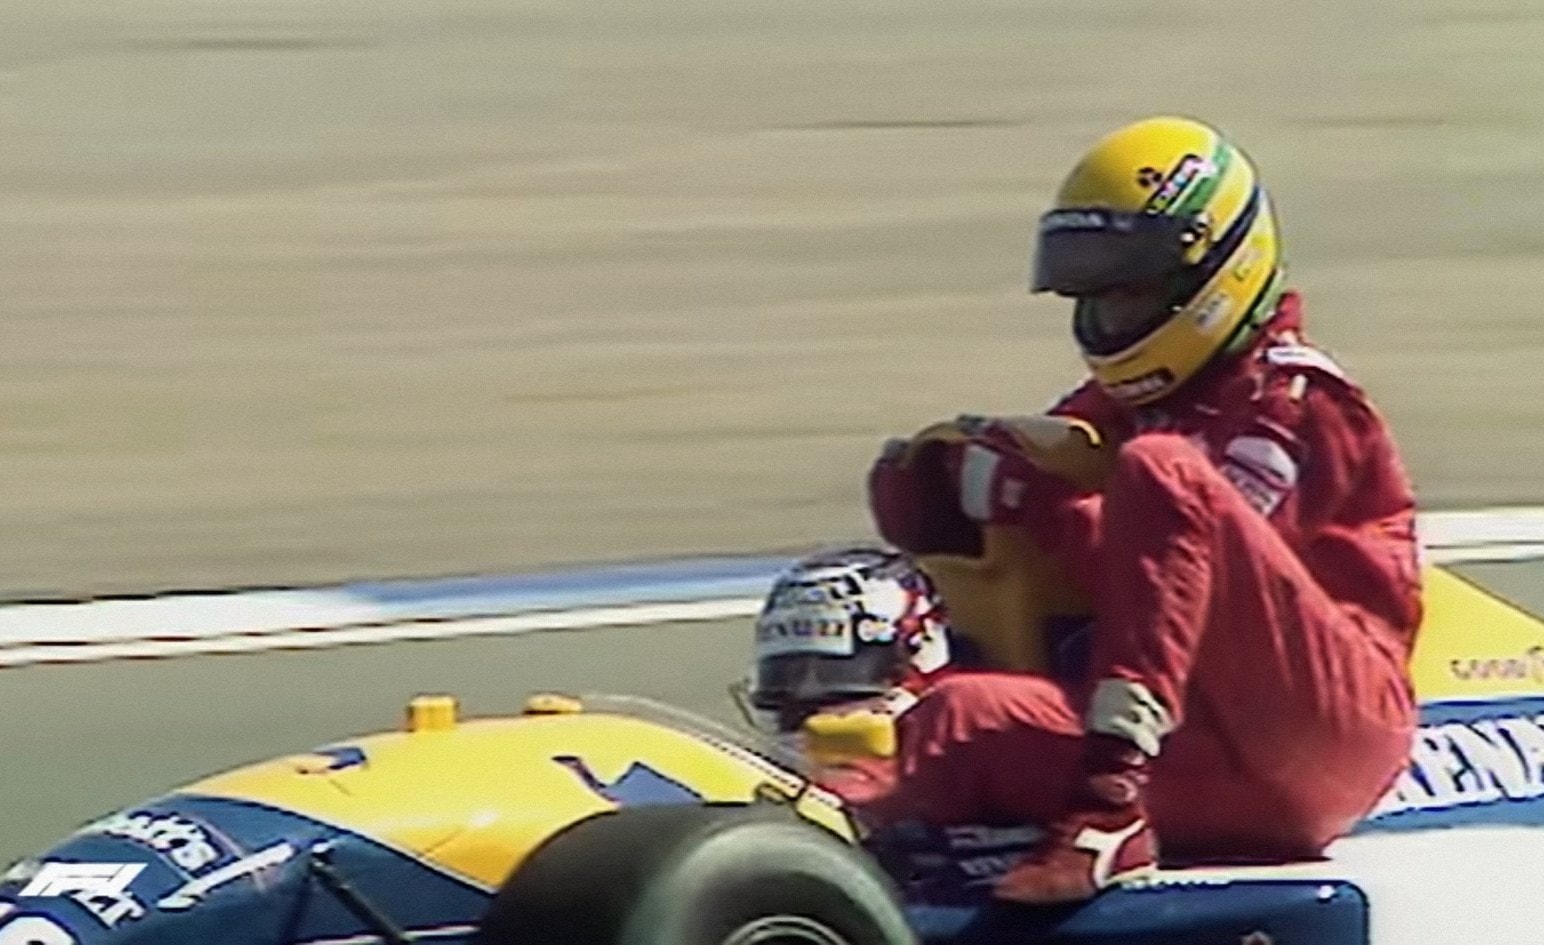 Ayrton Senna takes a lift from Nigel Mansell at the Silverstone GP in 1991.